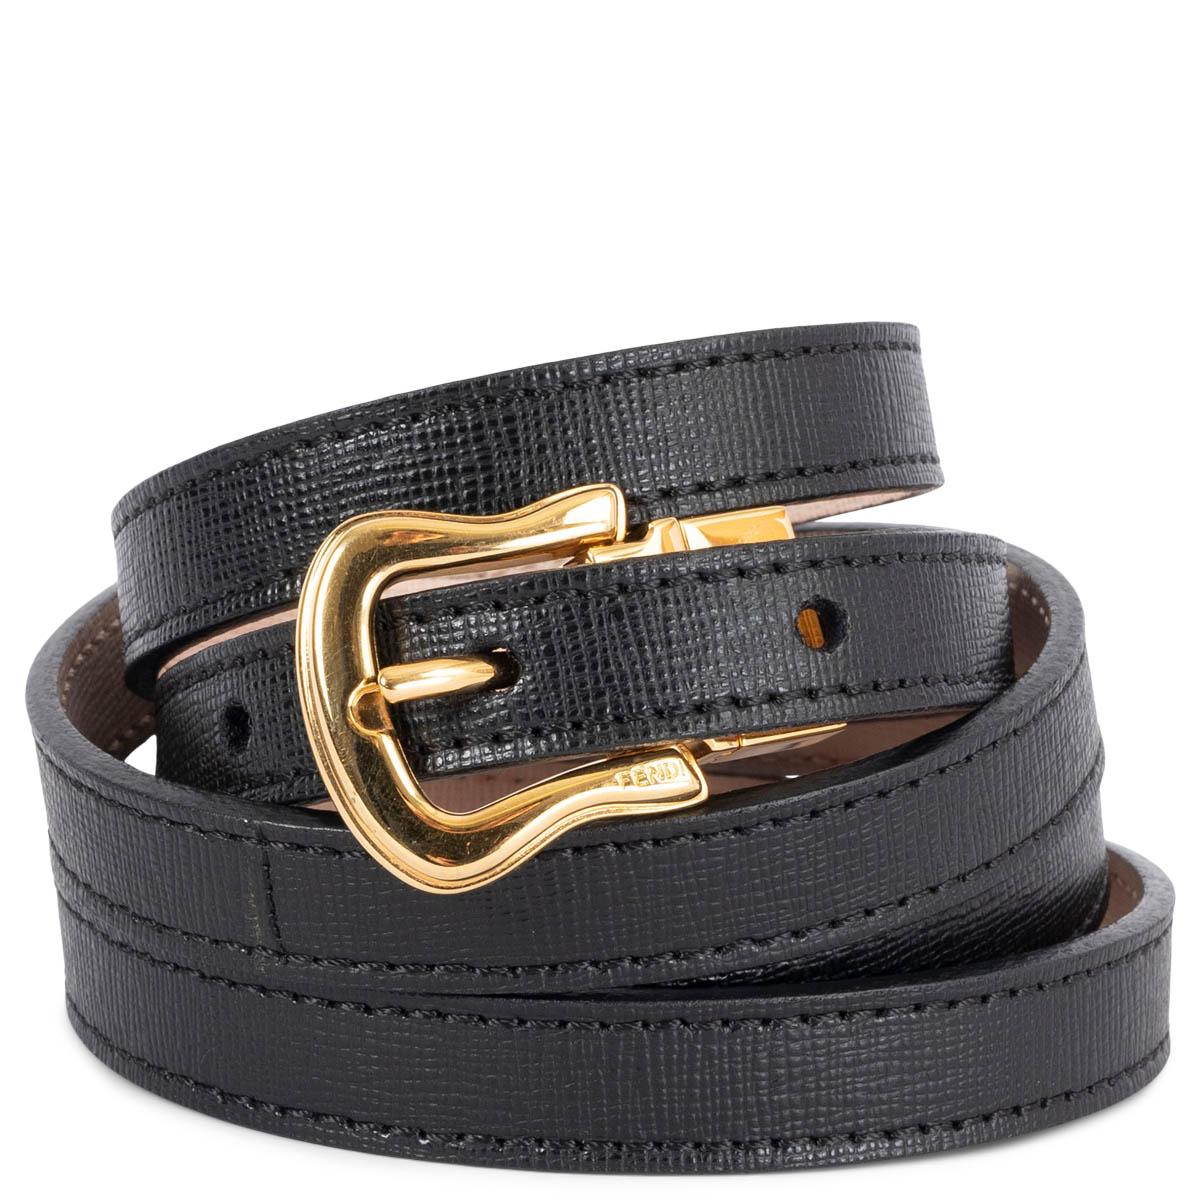 100% authentic Fendi reversible double wrap waist belt in black and pink saffiano leather with a gold-tone metal buckle. Has been worn and is in excellent condition.


Measurements
Tag Size	75
Width	1.2cm (0.5in)
Fits	139cm (54.2in) to 150cm